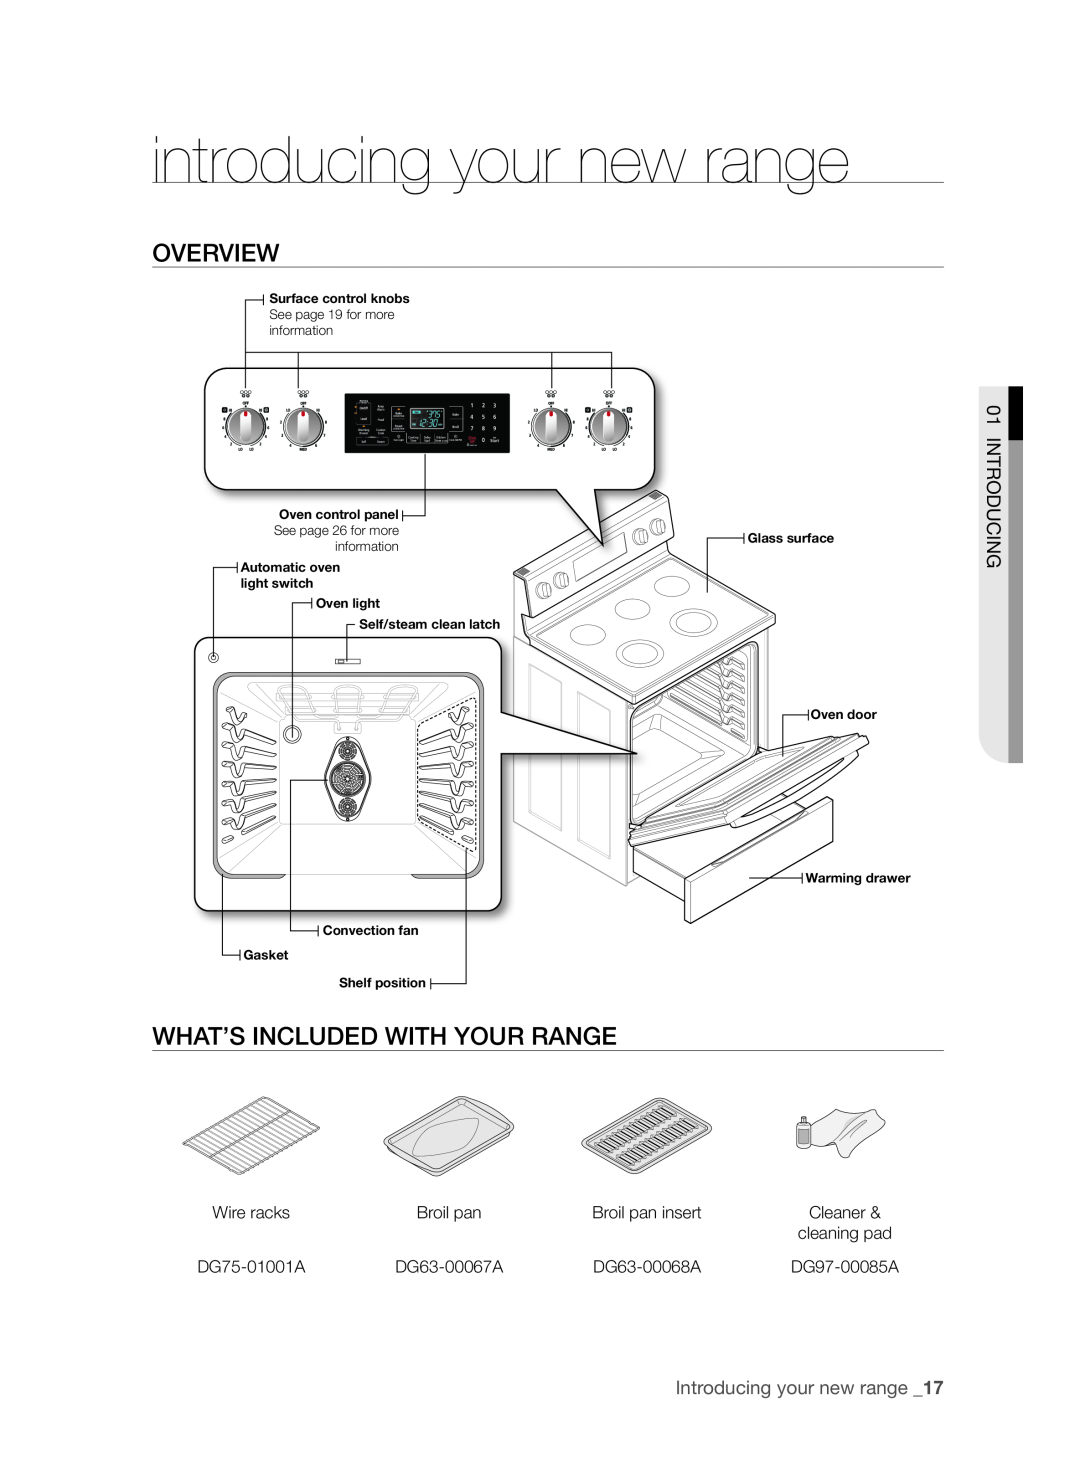 Samsung FE-R500WW user manual introducing your new range, Overview, What’s included with your range, Introducing 